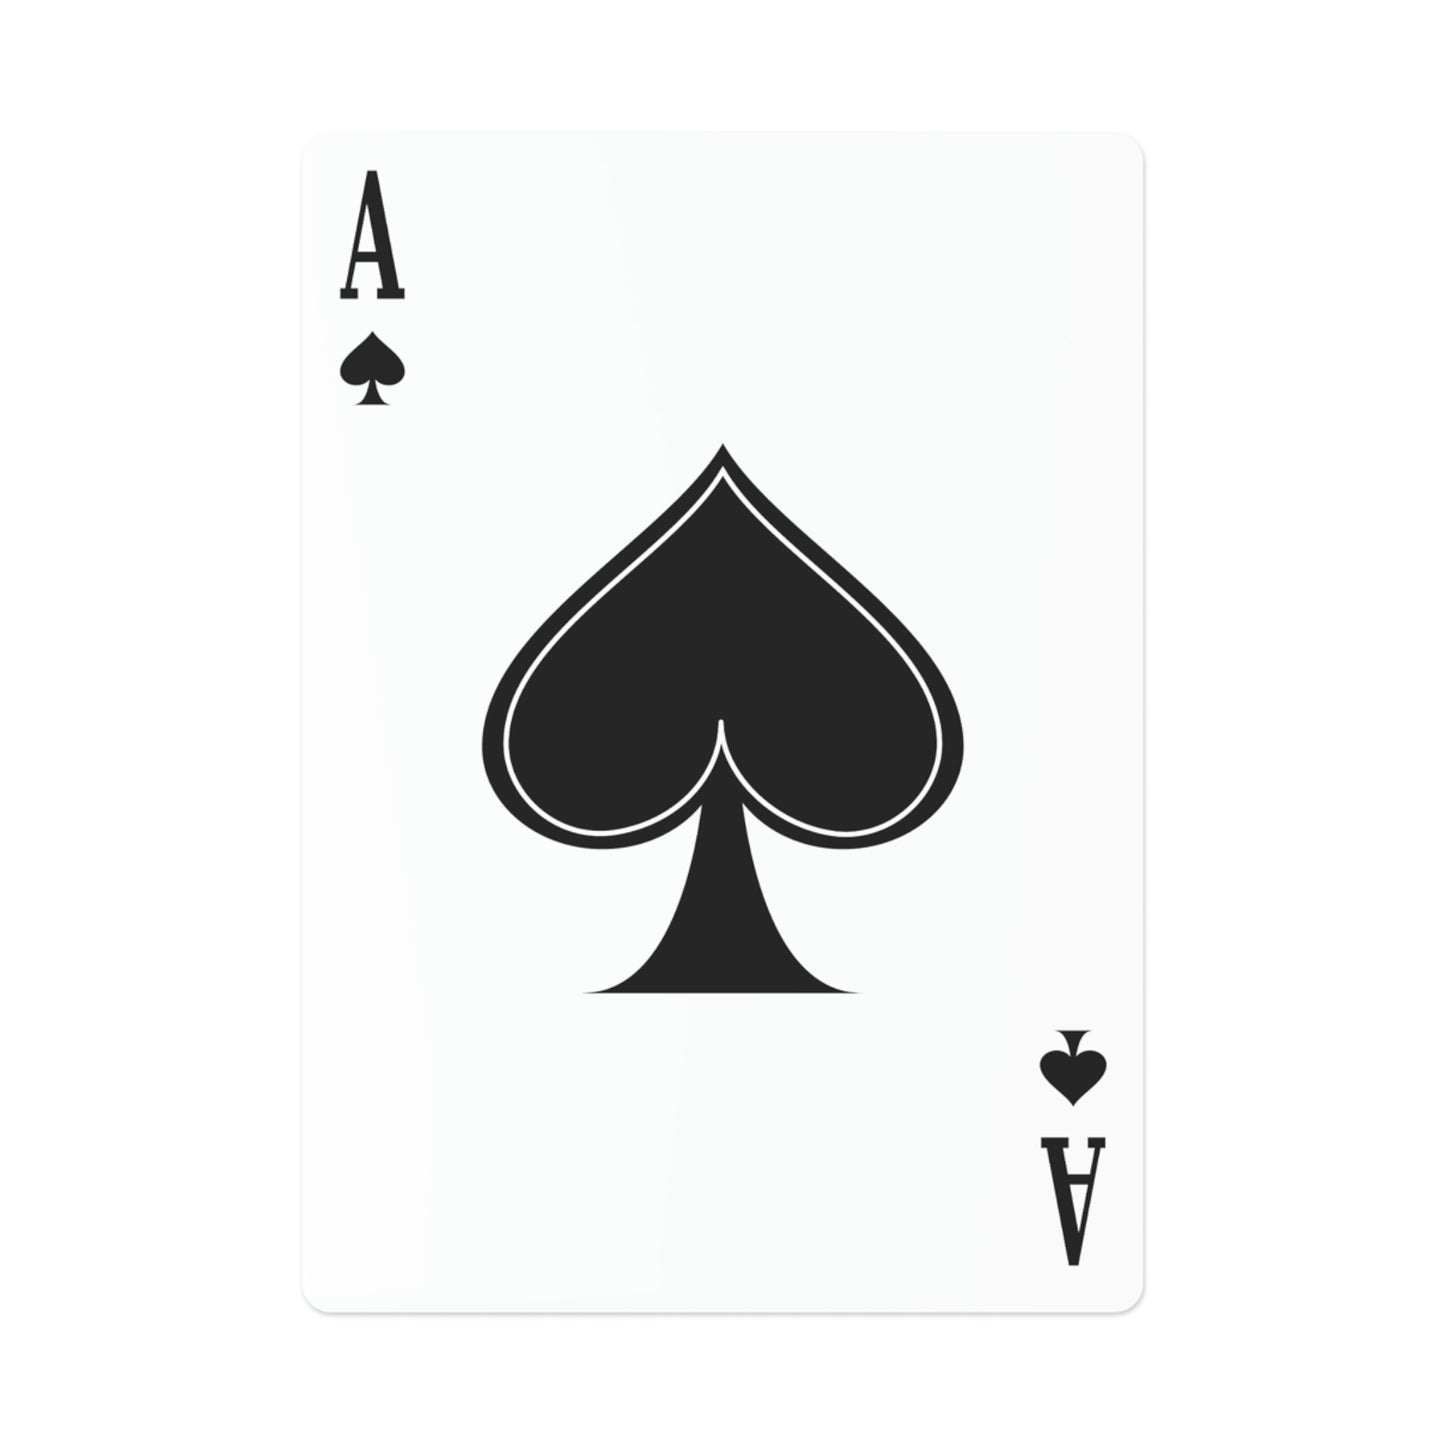 Cousins' Club - Playing Cards